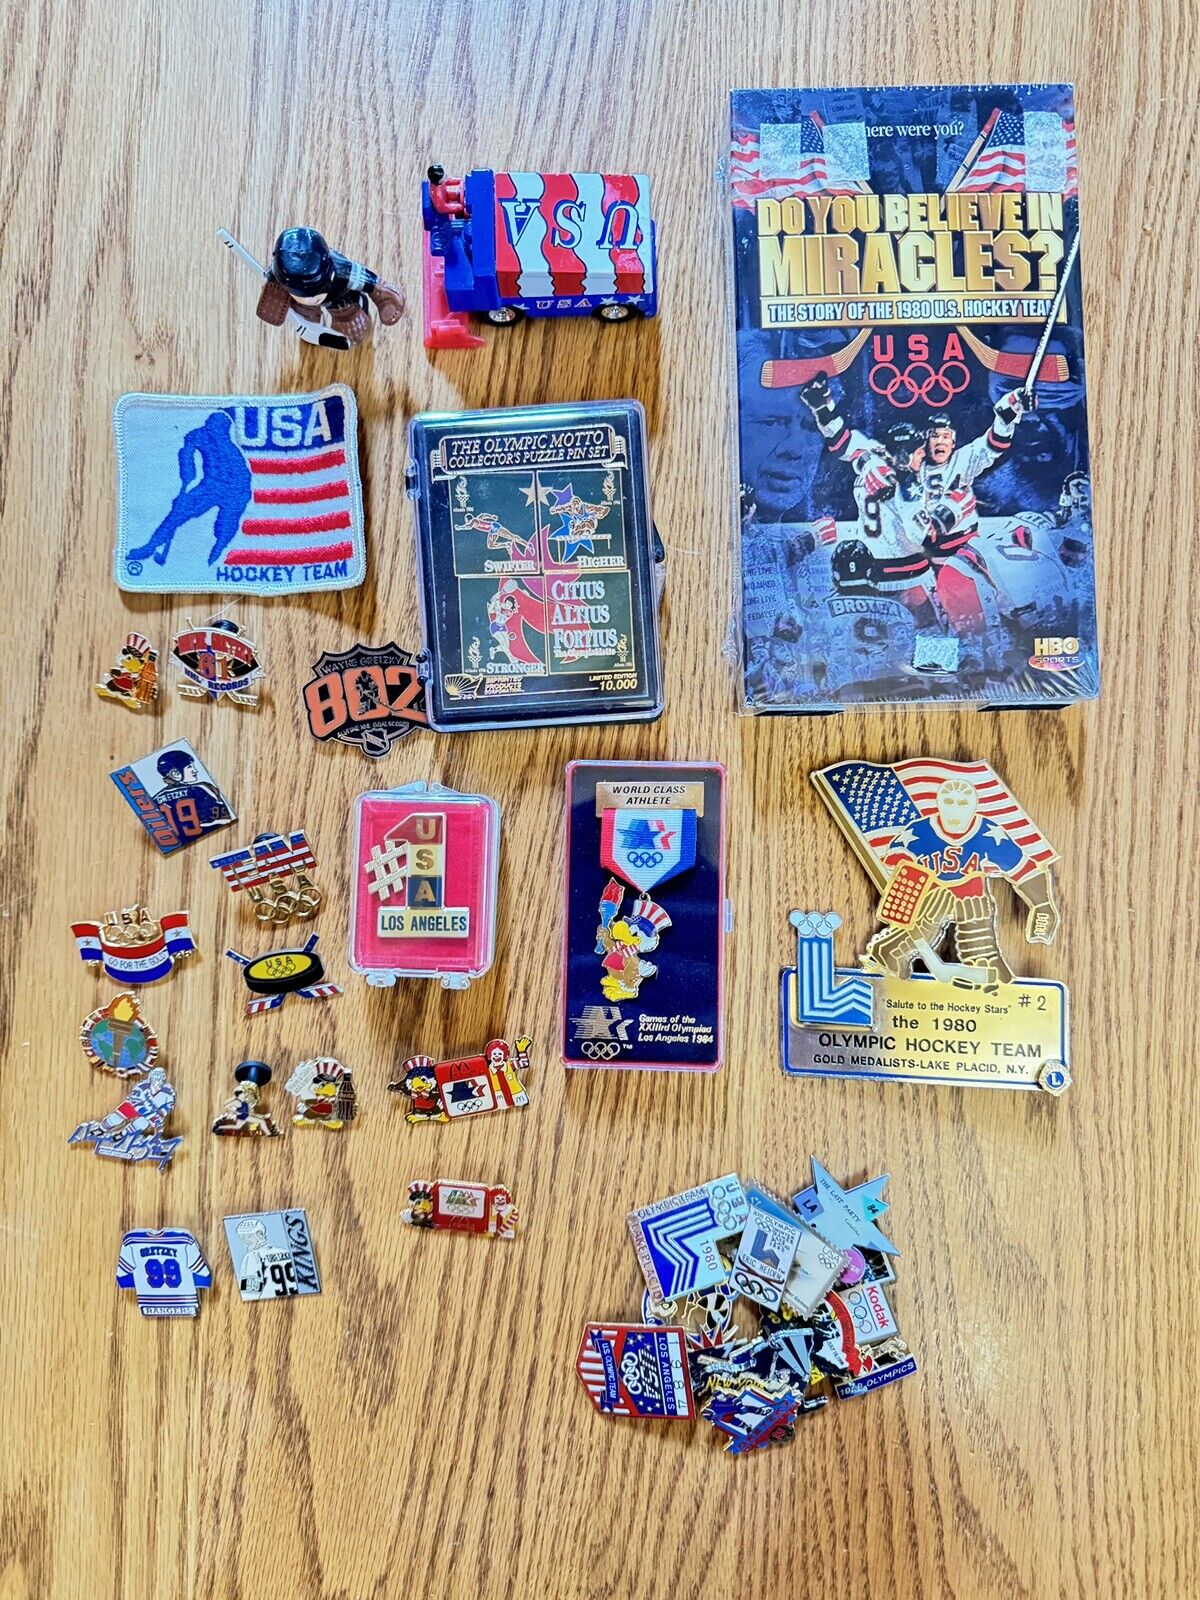 Wayne Gretzky Olympics Collectibles Pins Patch VCR